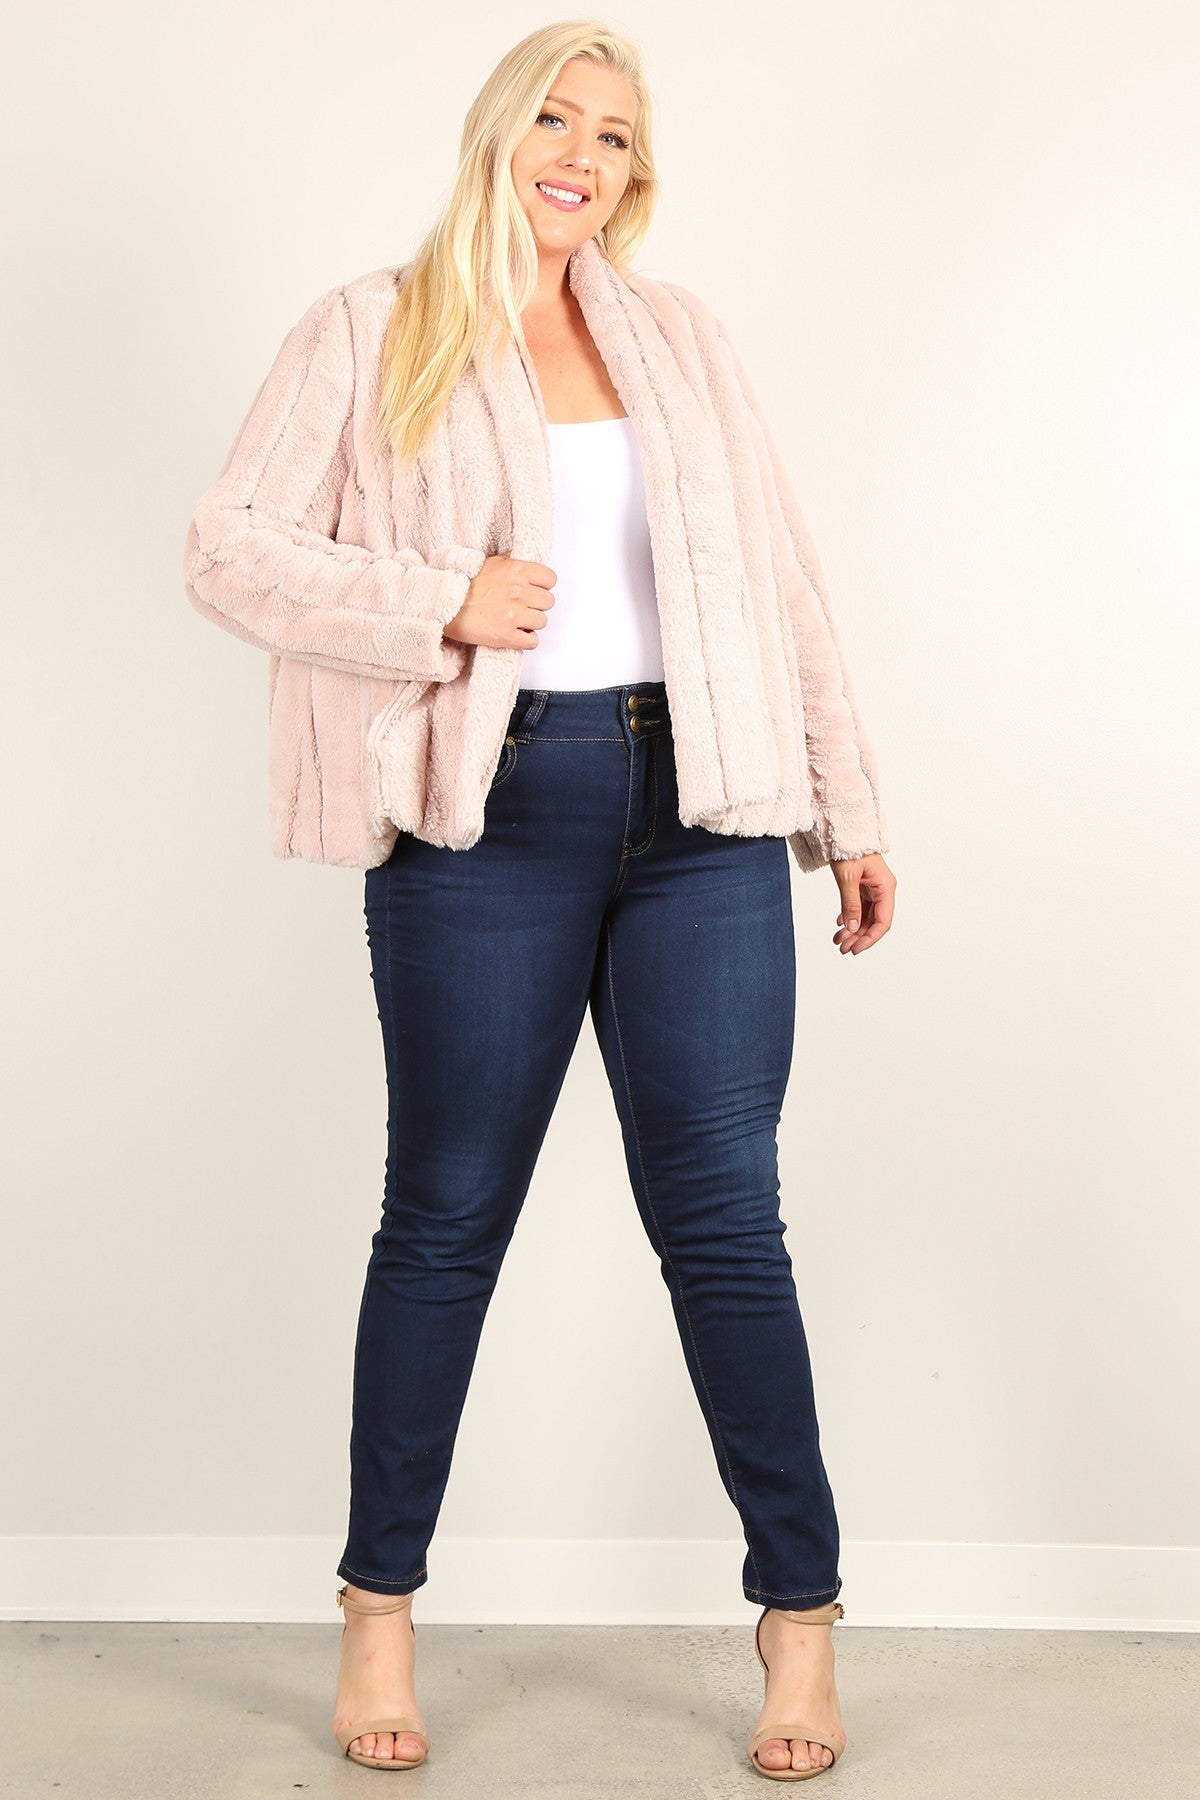 Plus Size Faux Fur Jackets With Open Front And Loose Fit - LOLA LUXE